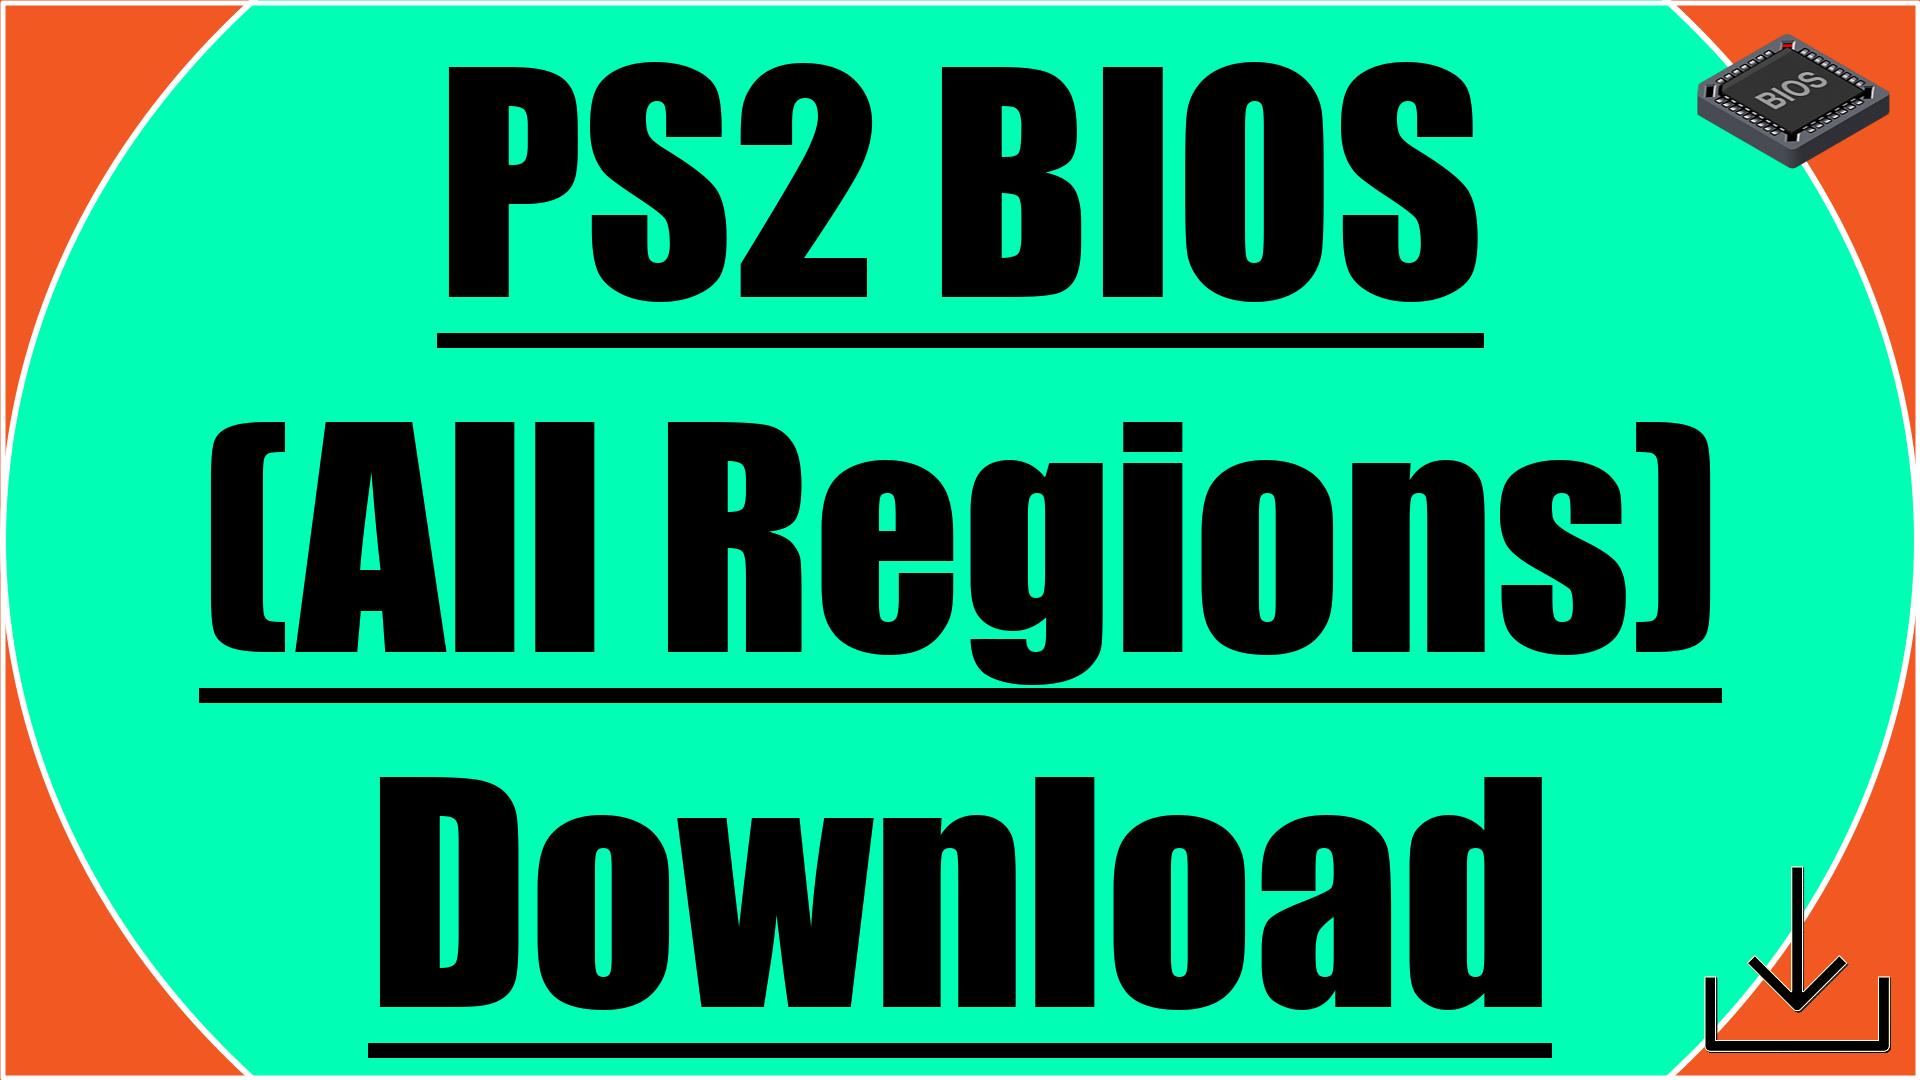 all ps2 bios download